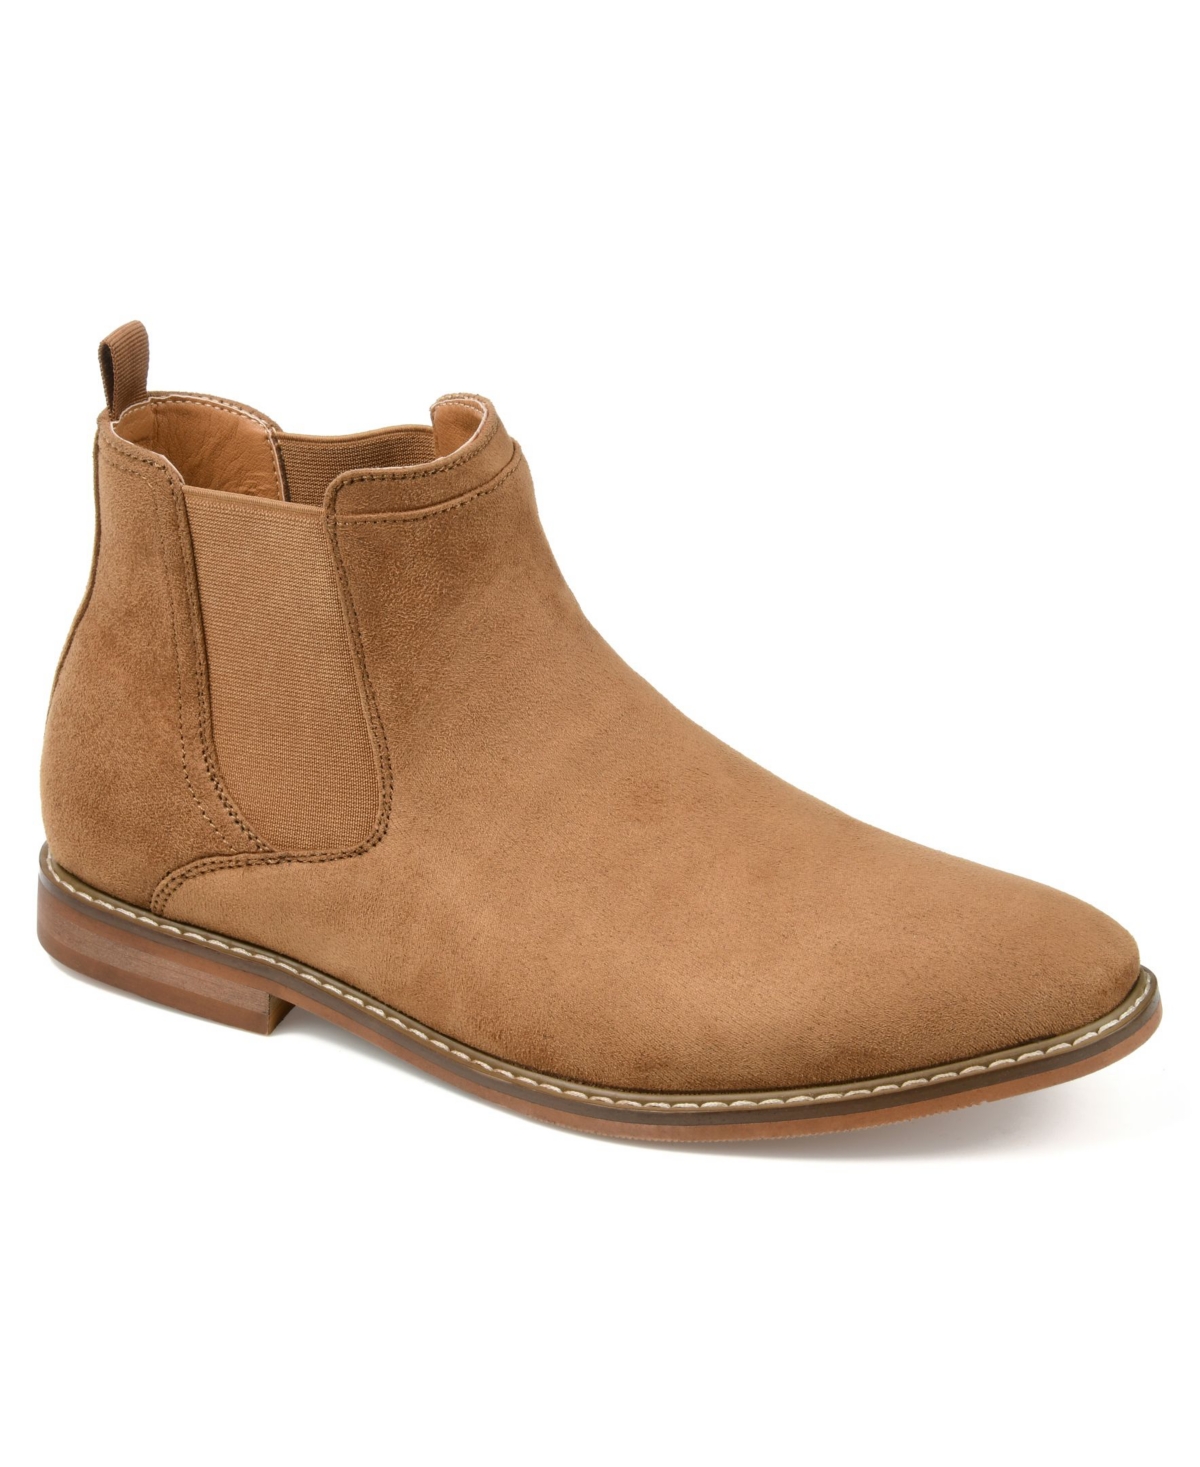 Marshall Men's Chelsea Boot - Taupe